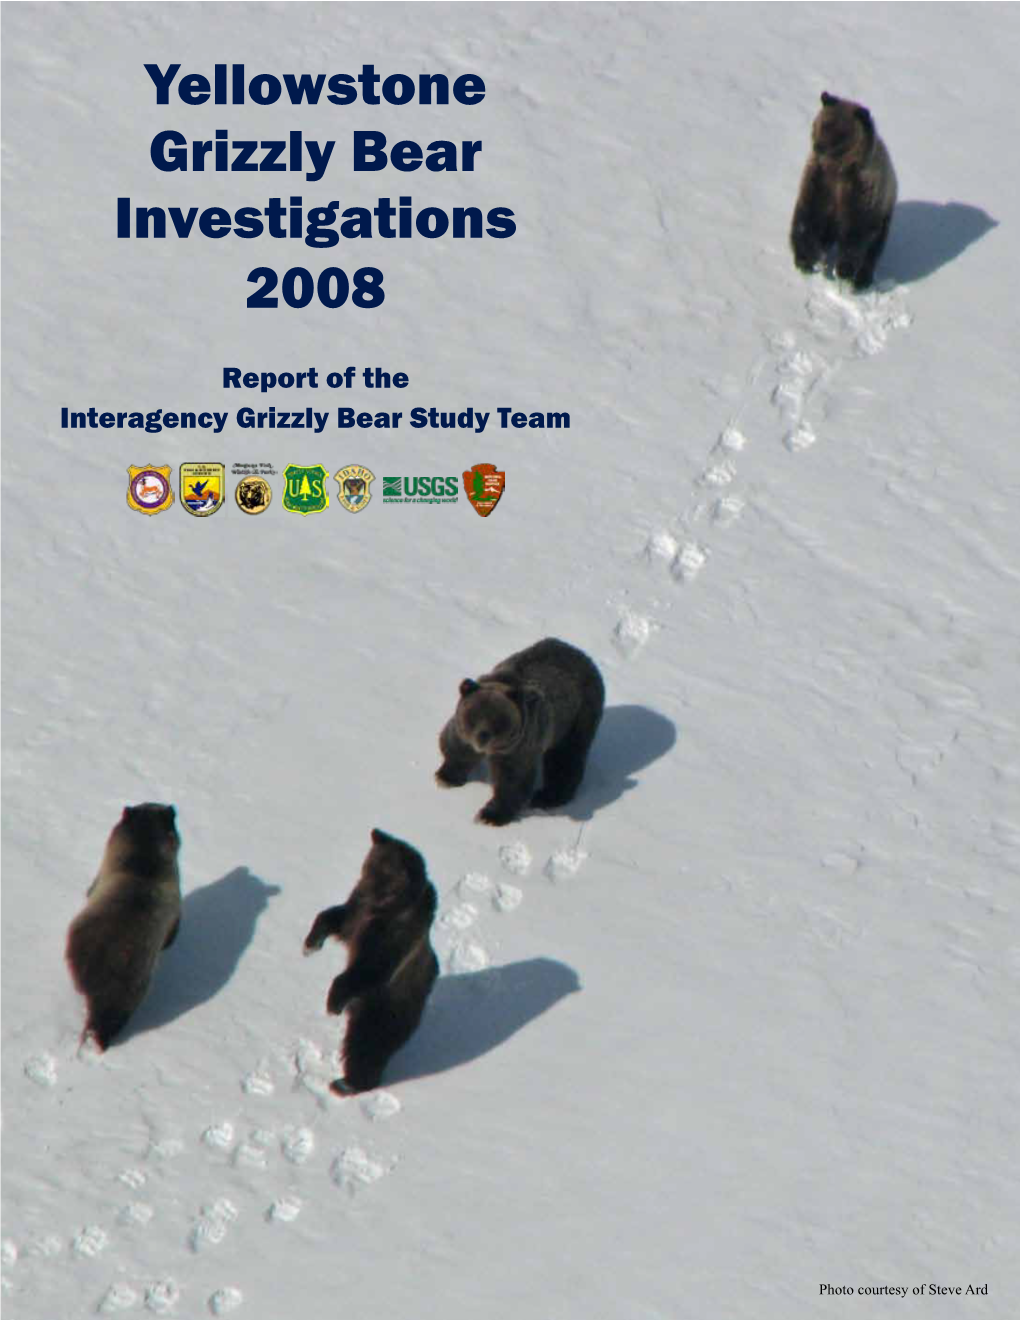 Yellowstone Grizzly Bear Investigations 2008